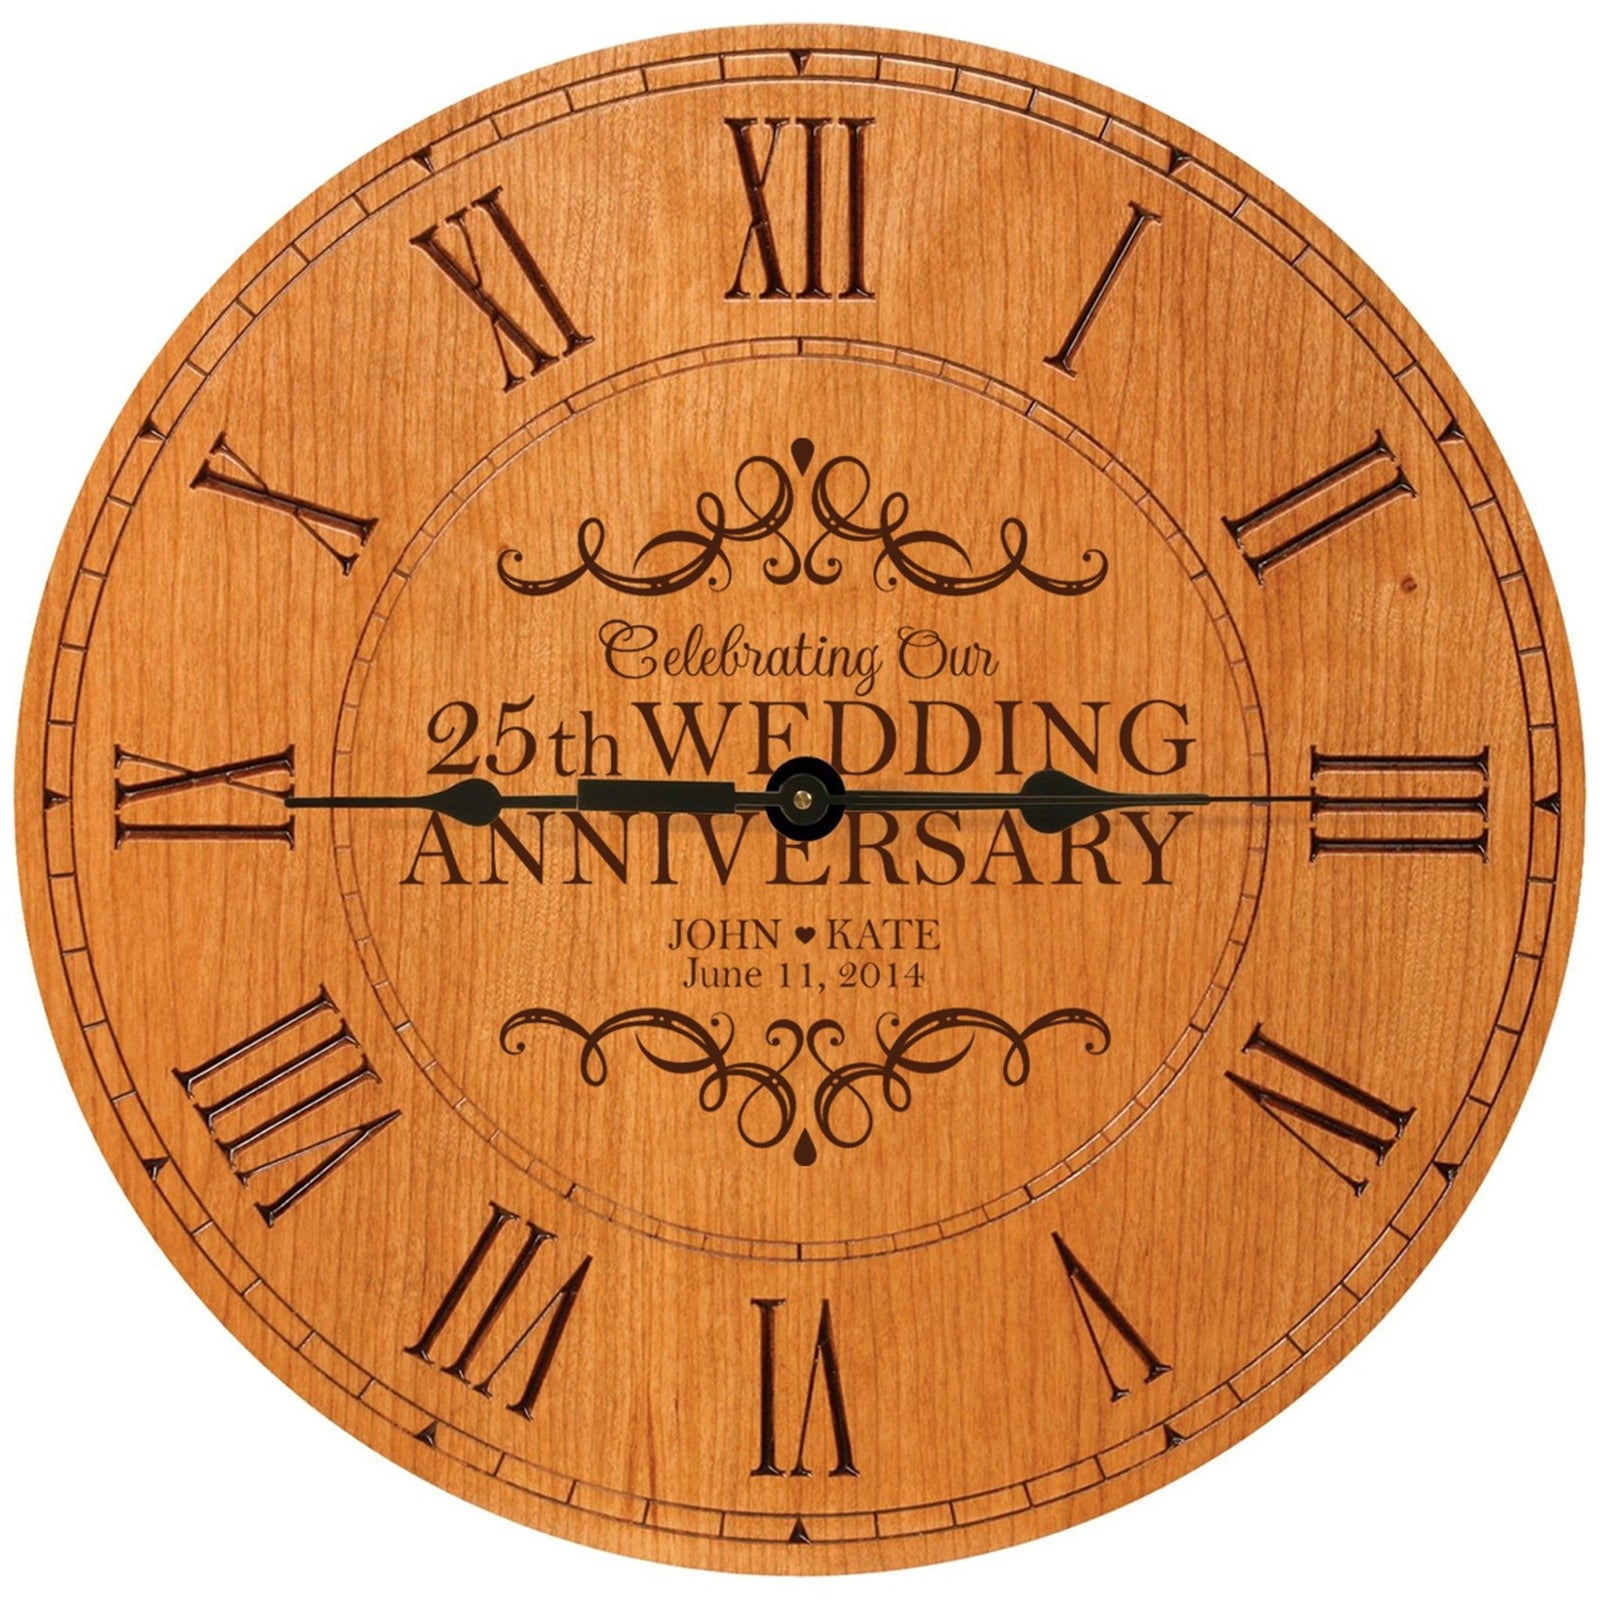 Lifesong Milestones Personalized Engraved Wooden Wall Clock for 25th Wedding Anniversary Gift Ideas